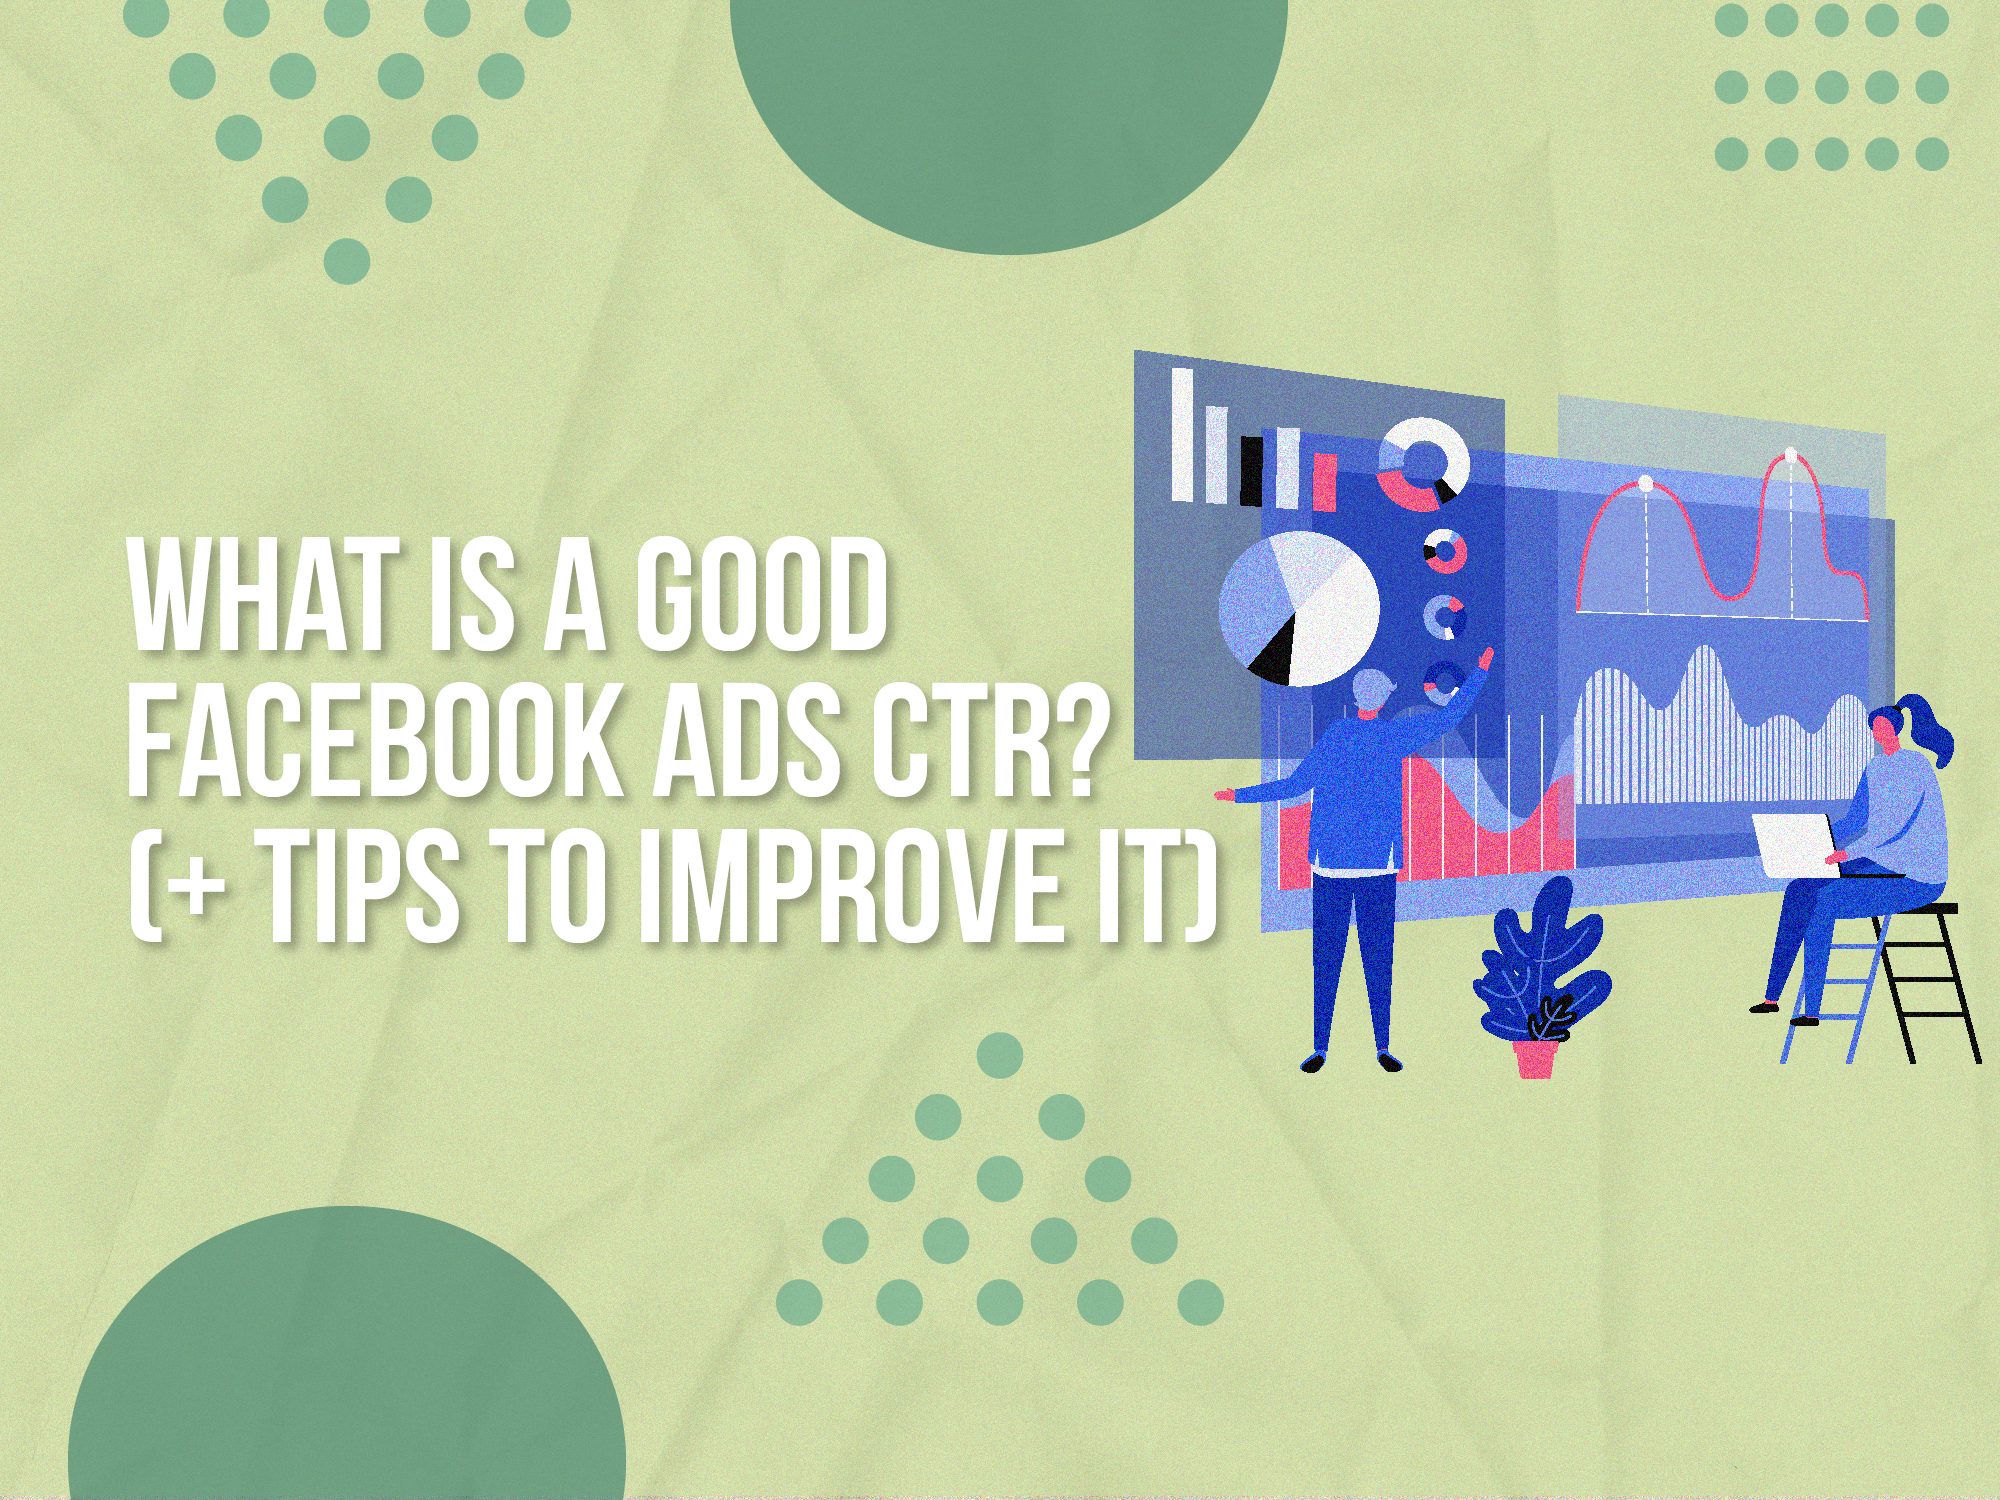 What is a Good Facebook Ads CTR? (+ Tips to Improve it)